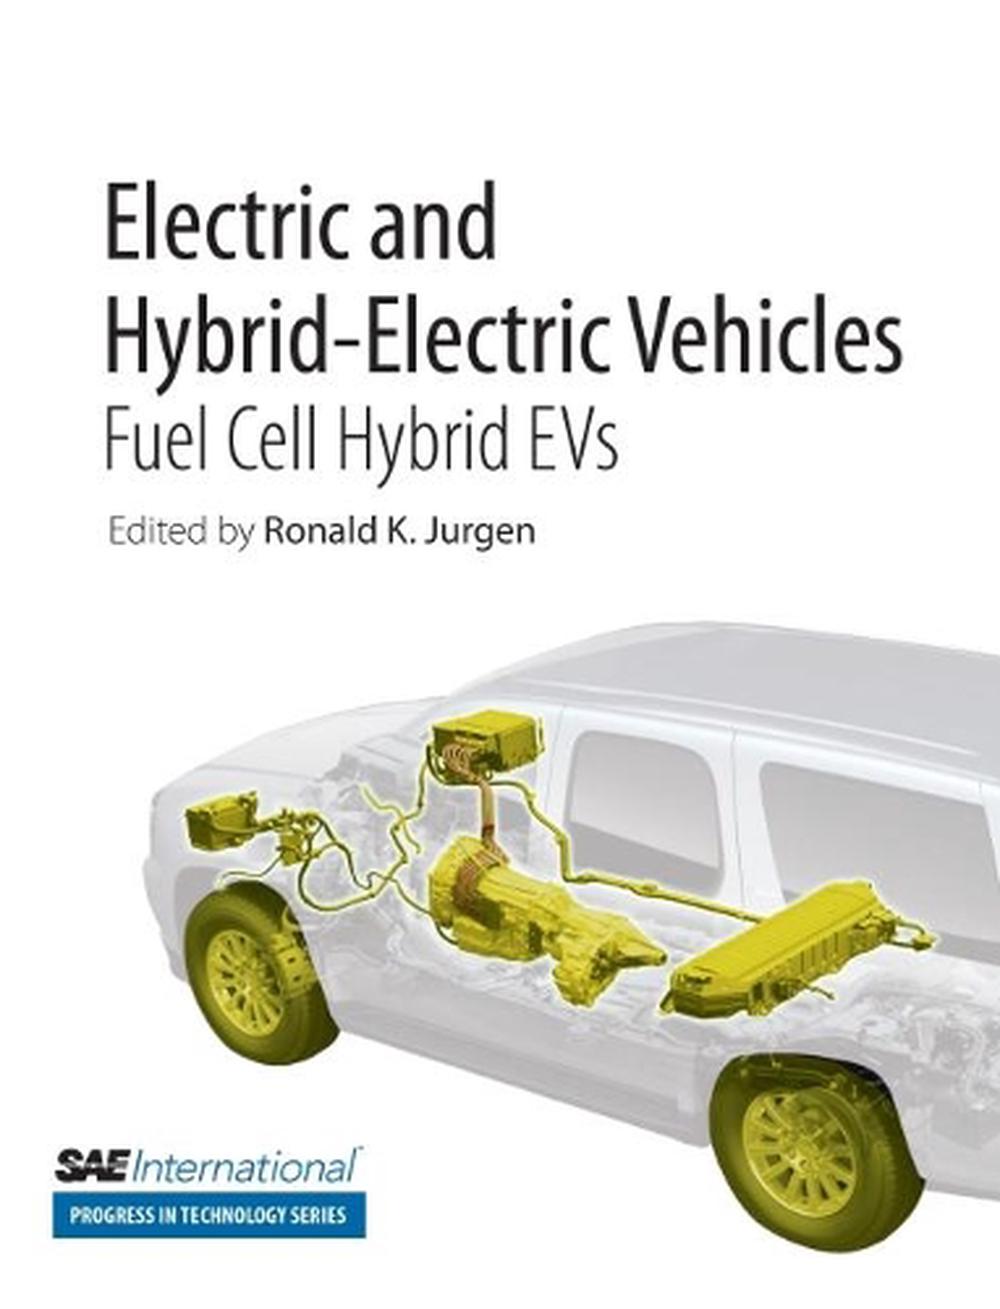 Electric and HybridElectric Vehicles. V. 5, Fuel Cell Hybrid Evs by